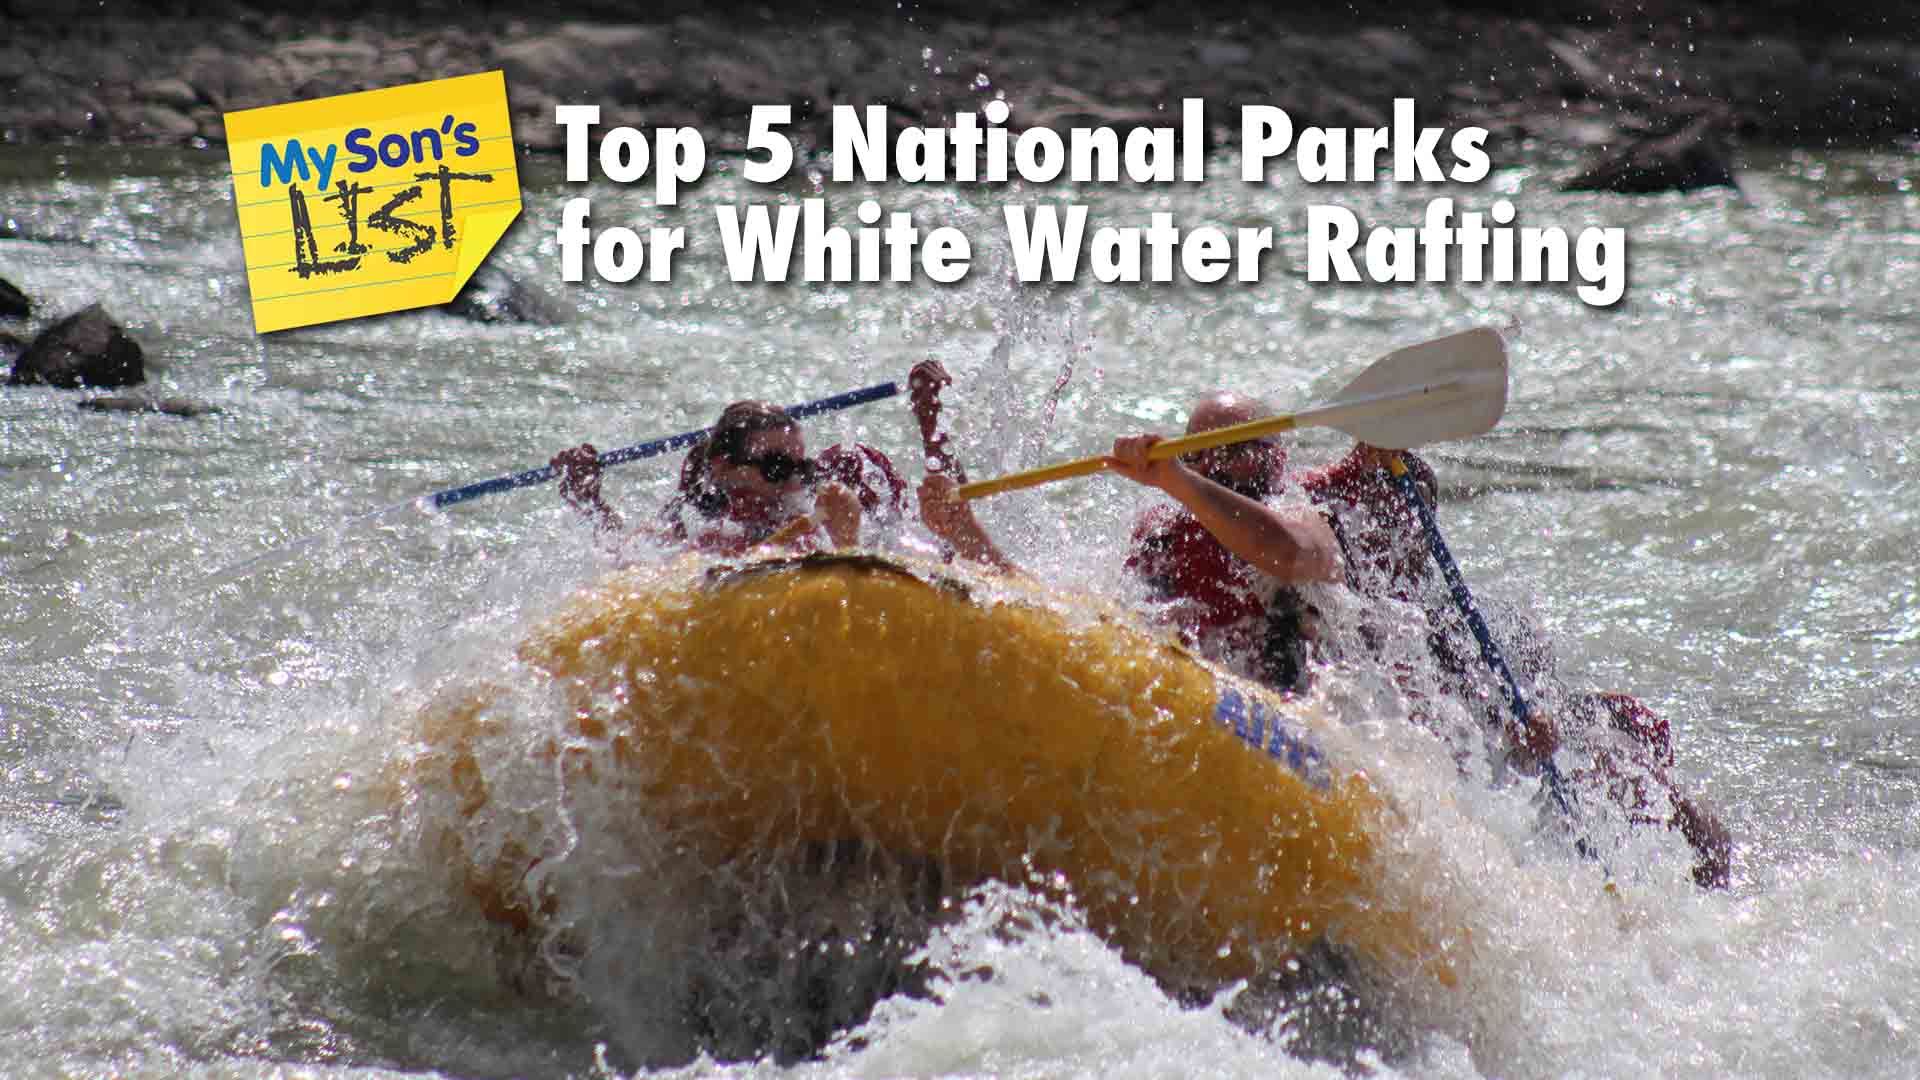 My Son's List of Top 5 National Parks for White Water Rafting